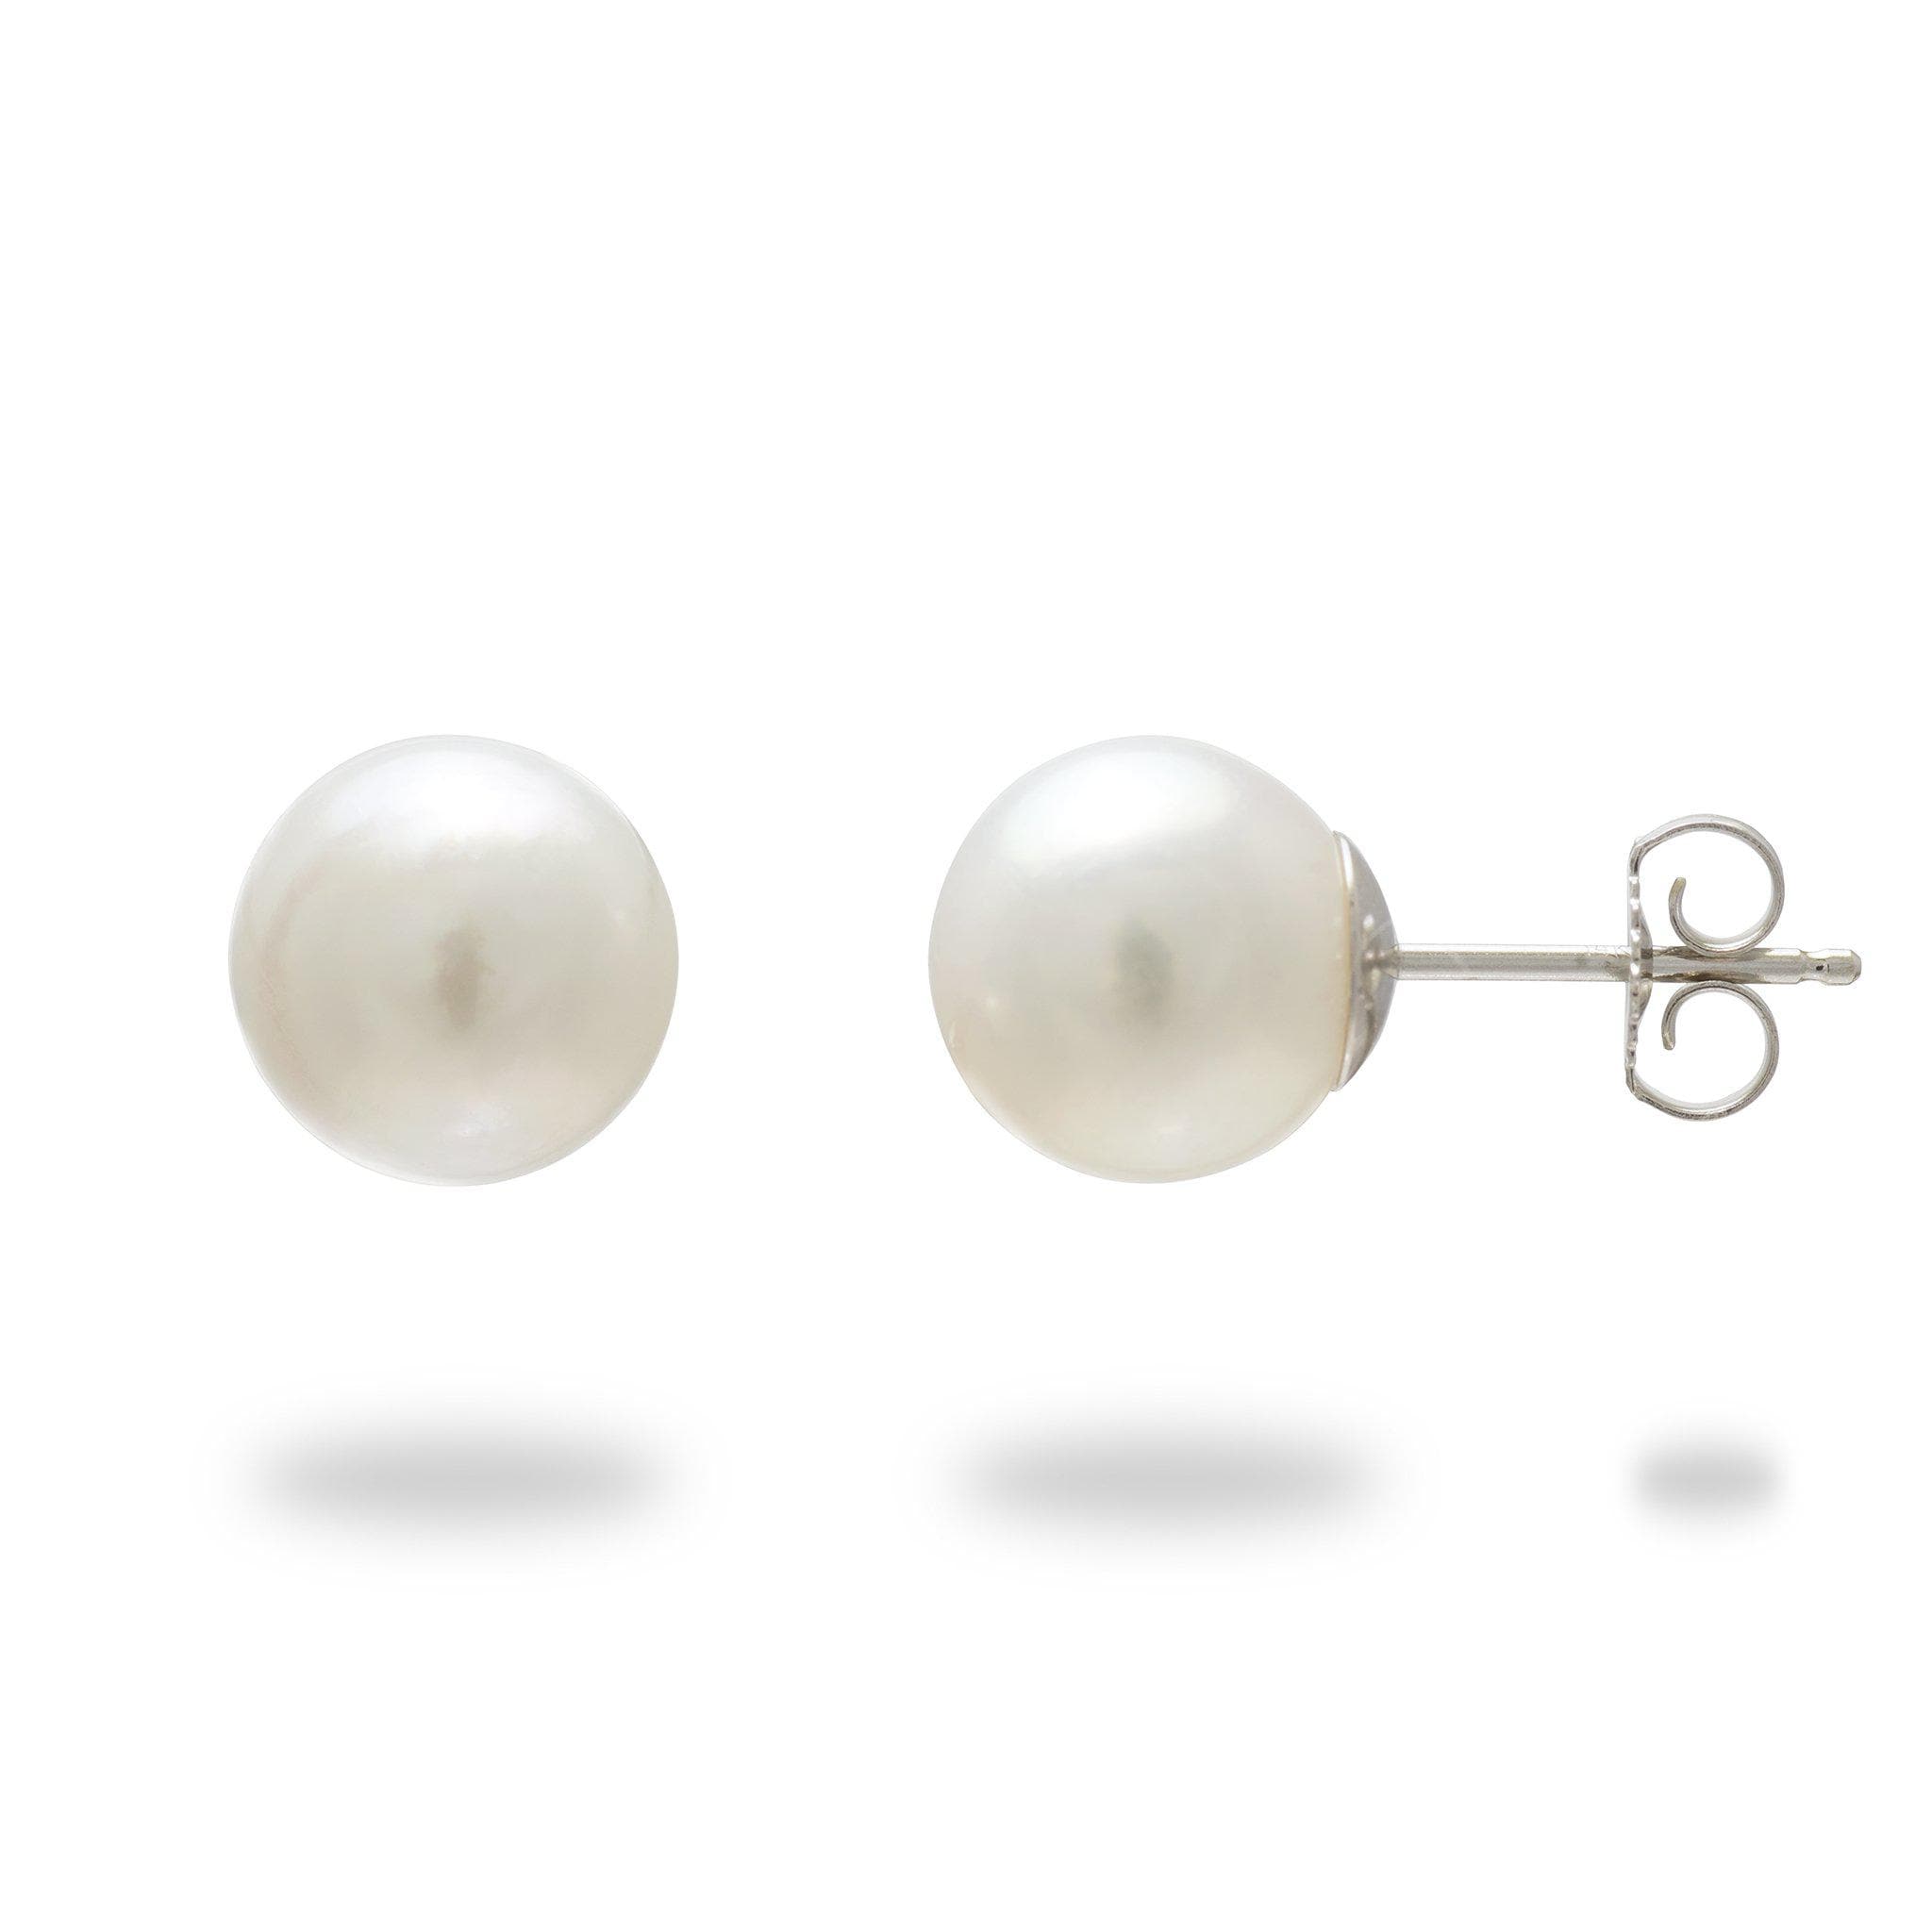 South Sea White Pearl Earrings in White Gold-Maui Divers Jewelry